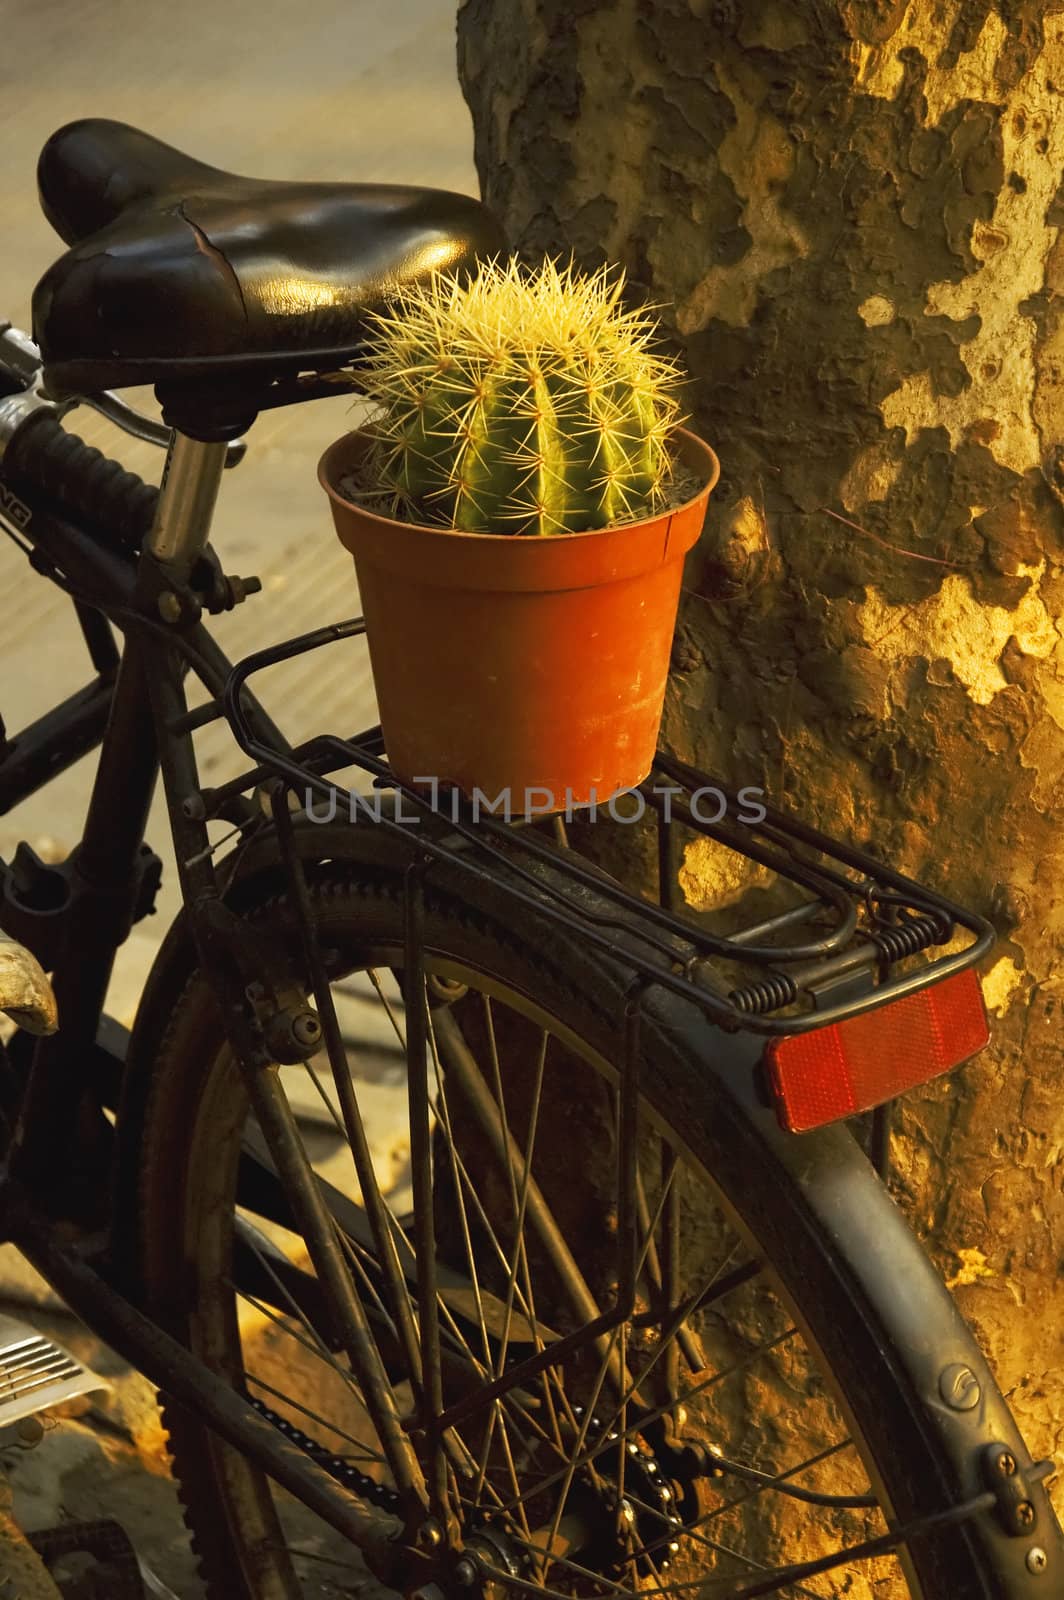 old bicycle with a plant on the back over a tree